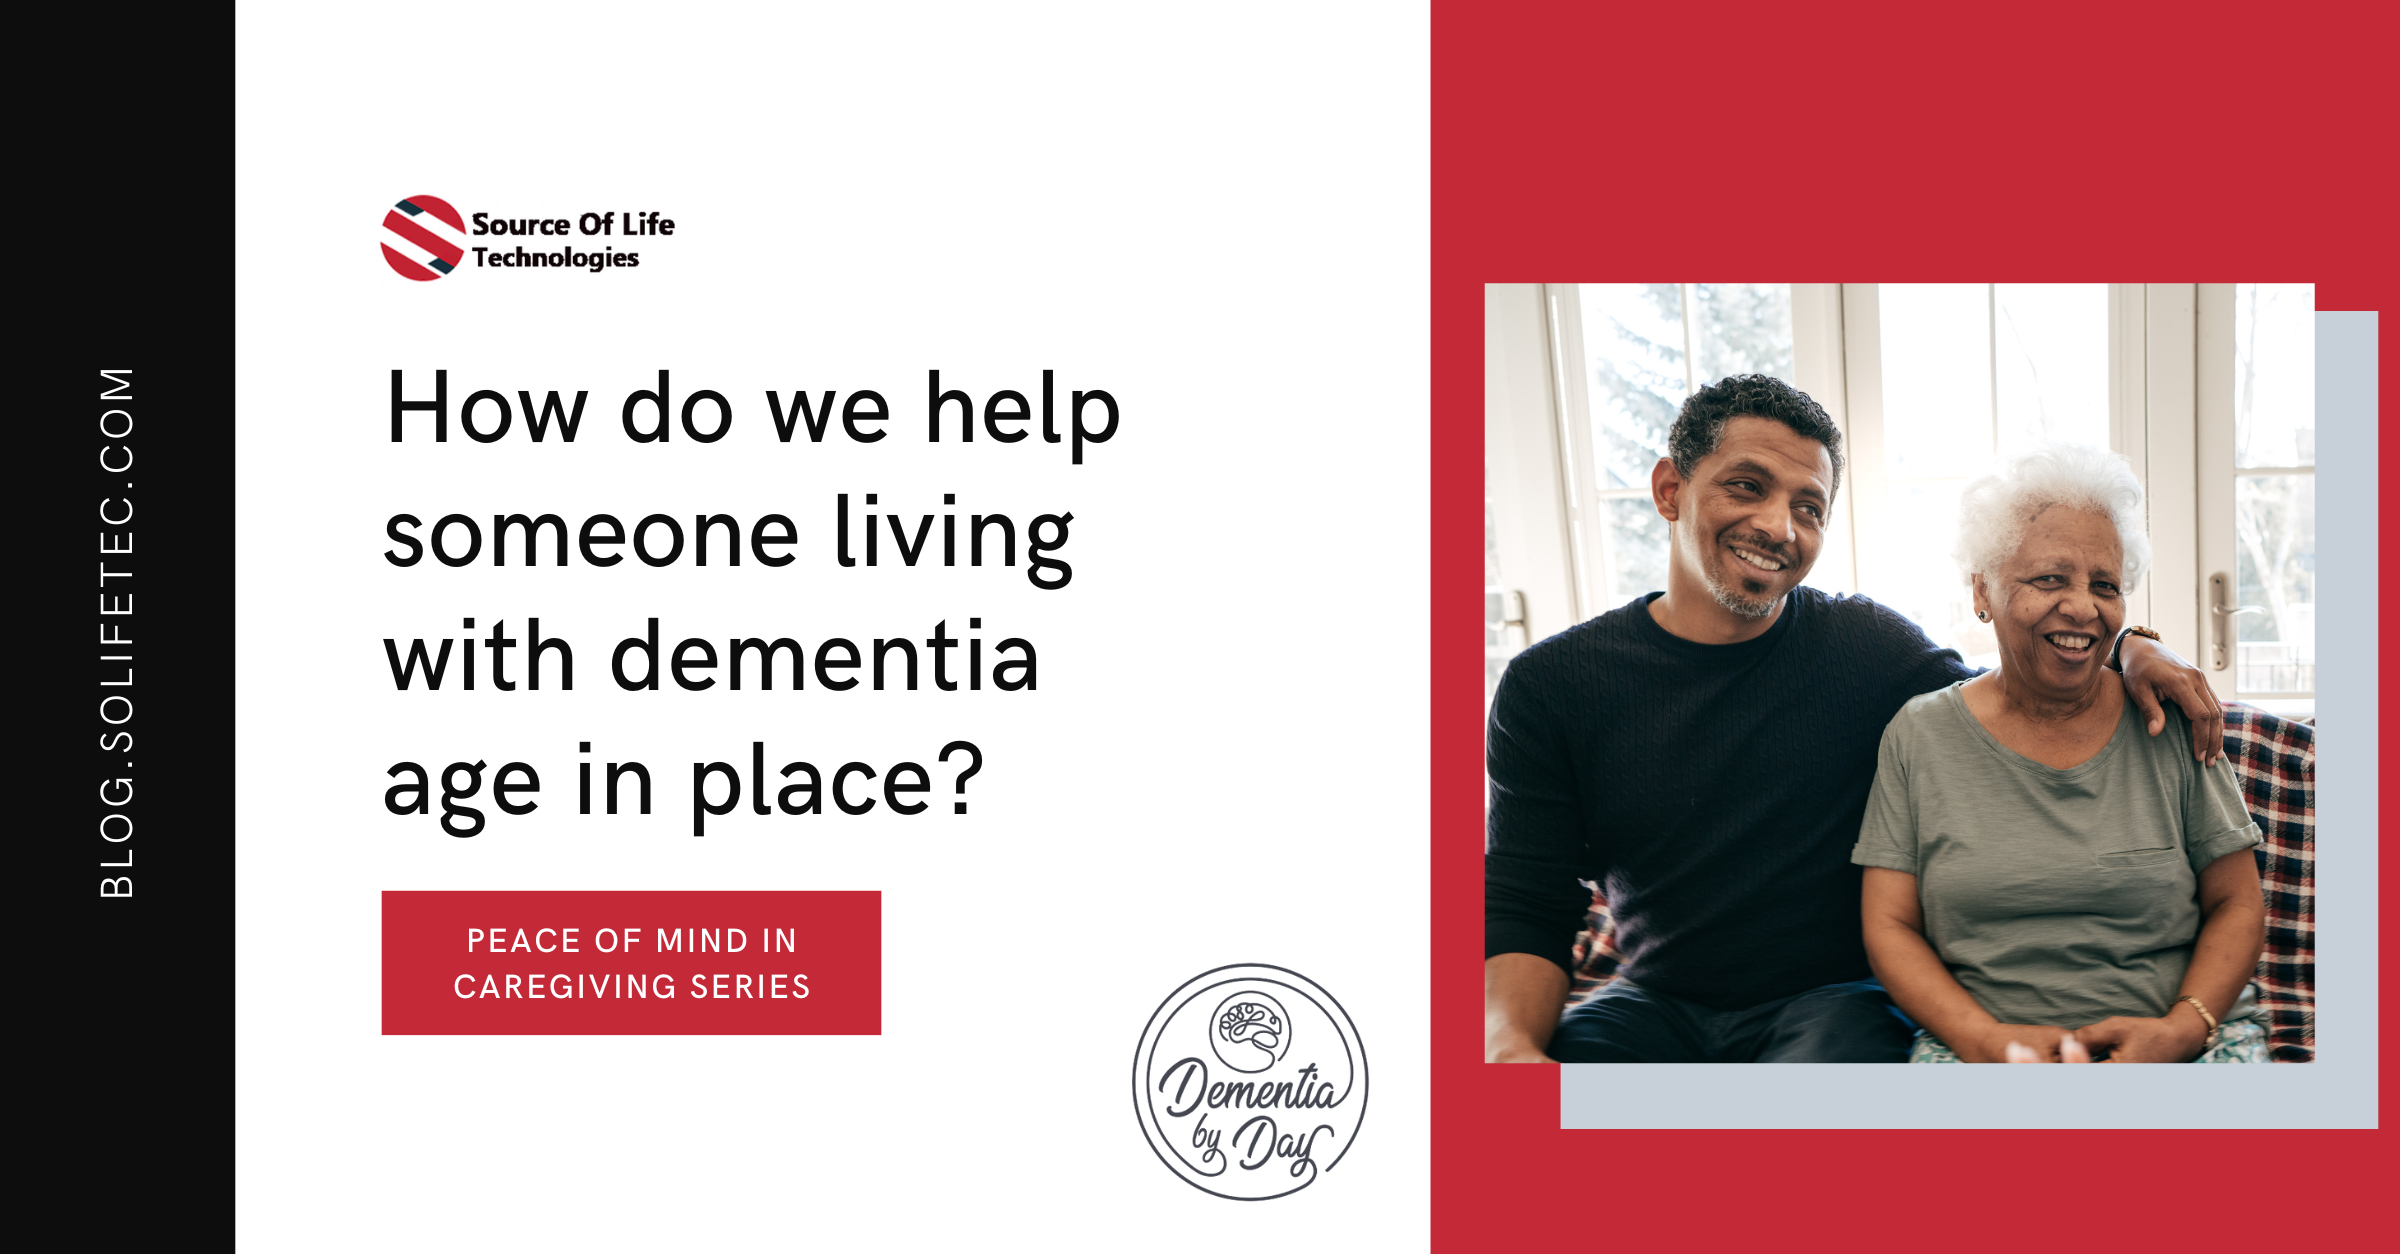 How do we help someone living with dementia age in place